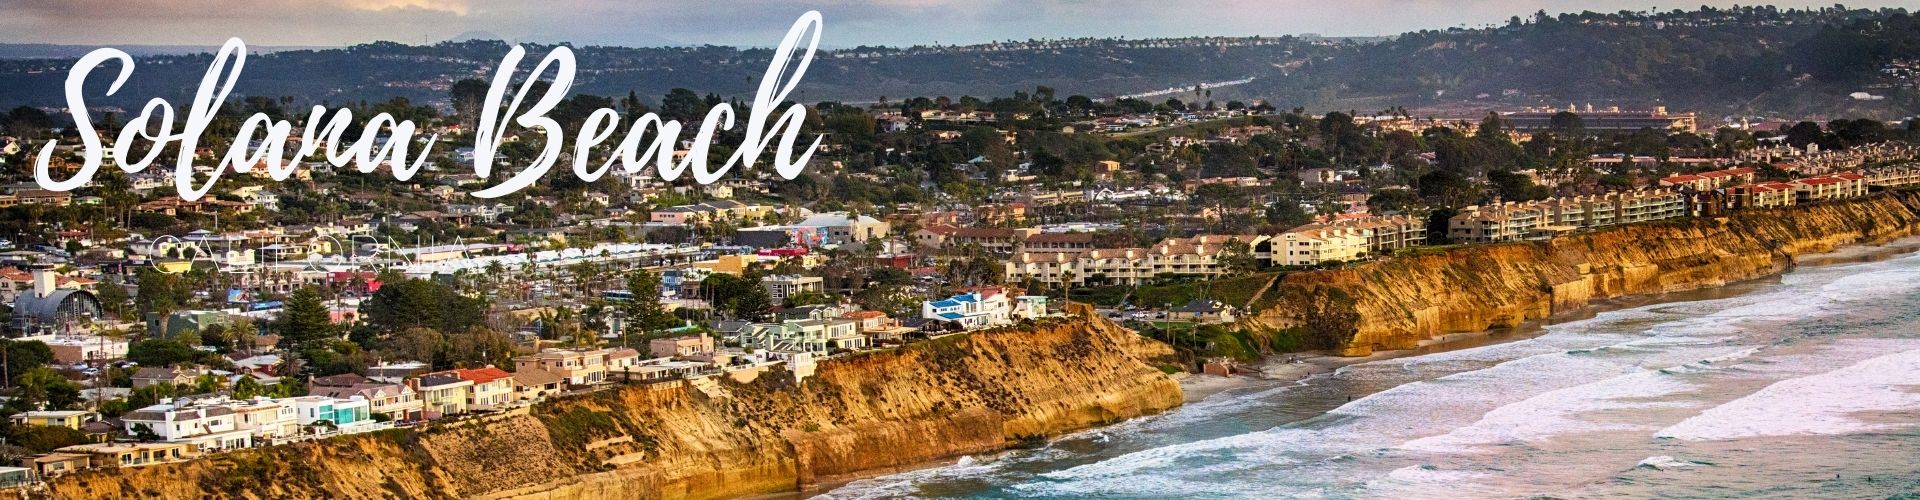 Solana Beach Homes and Lifestyle